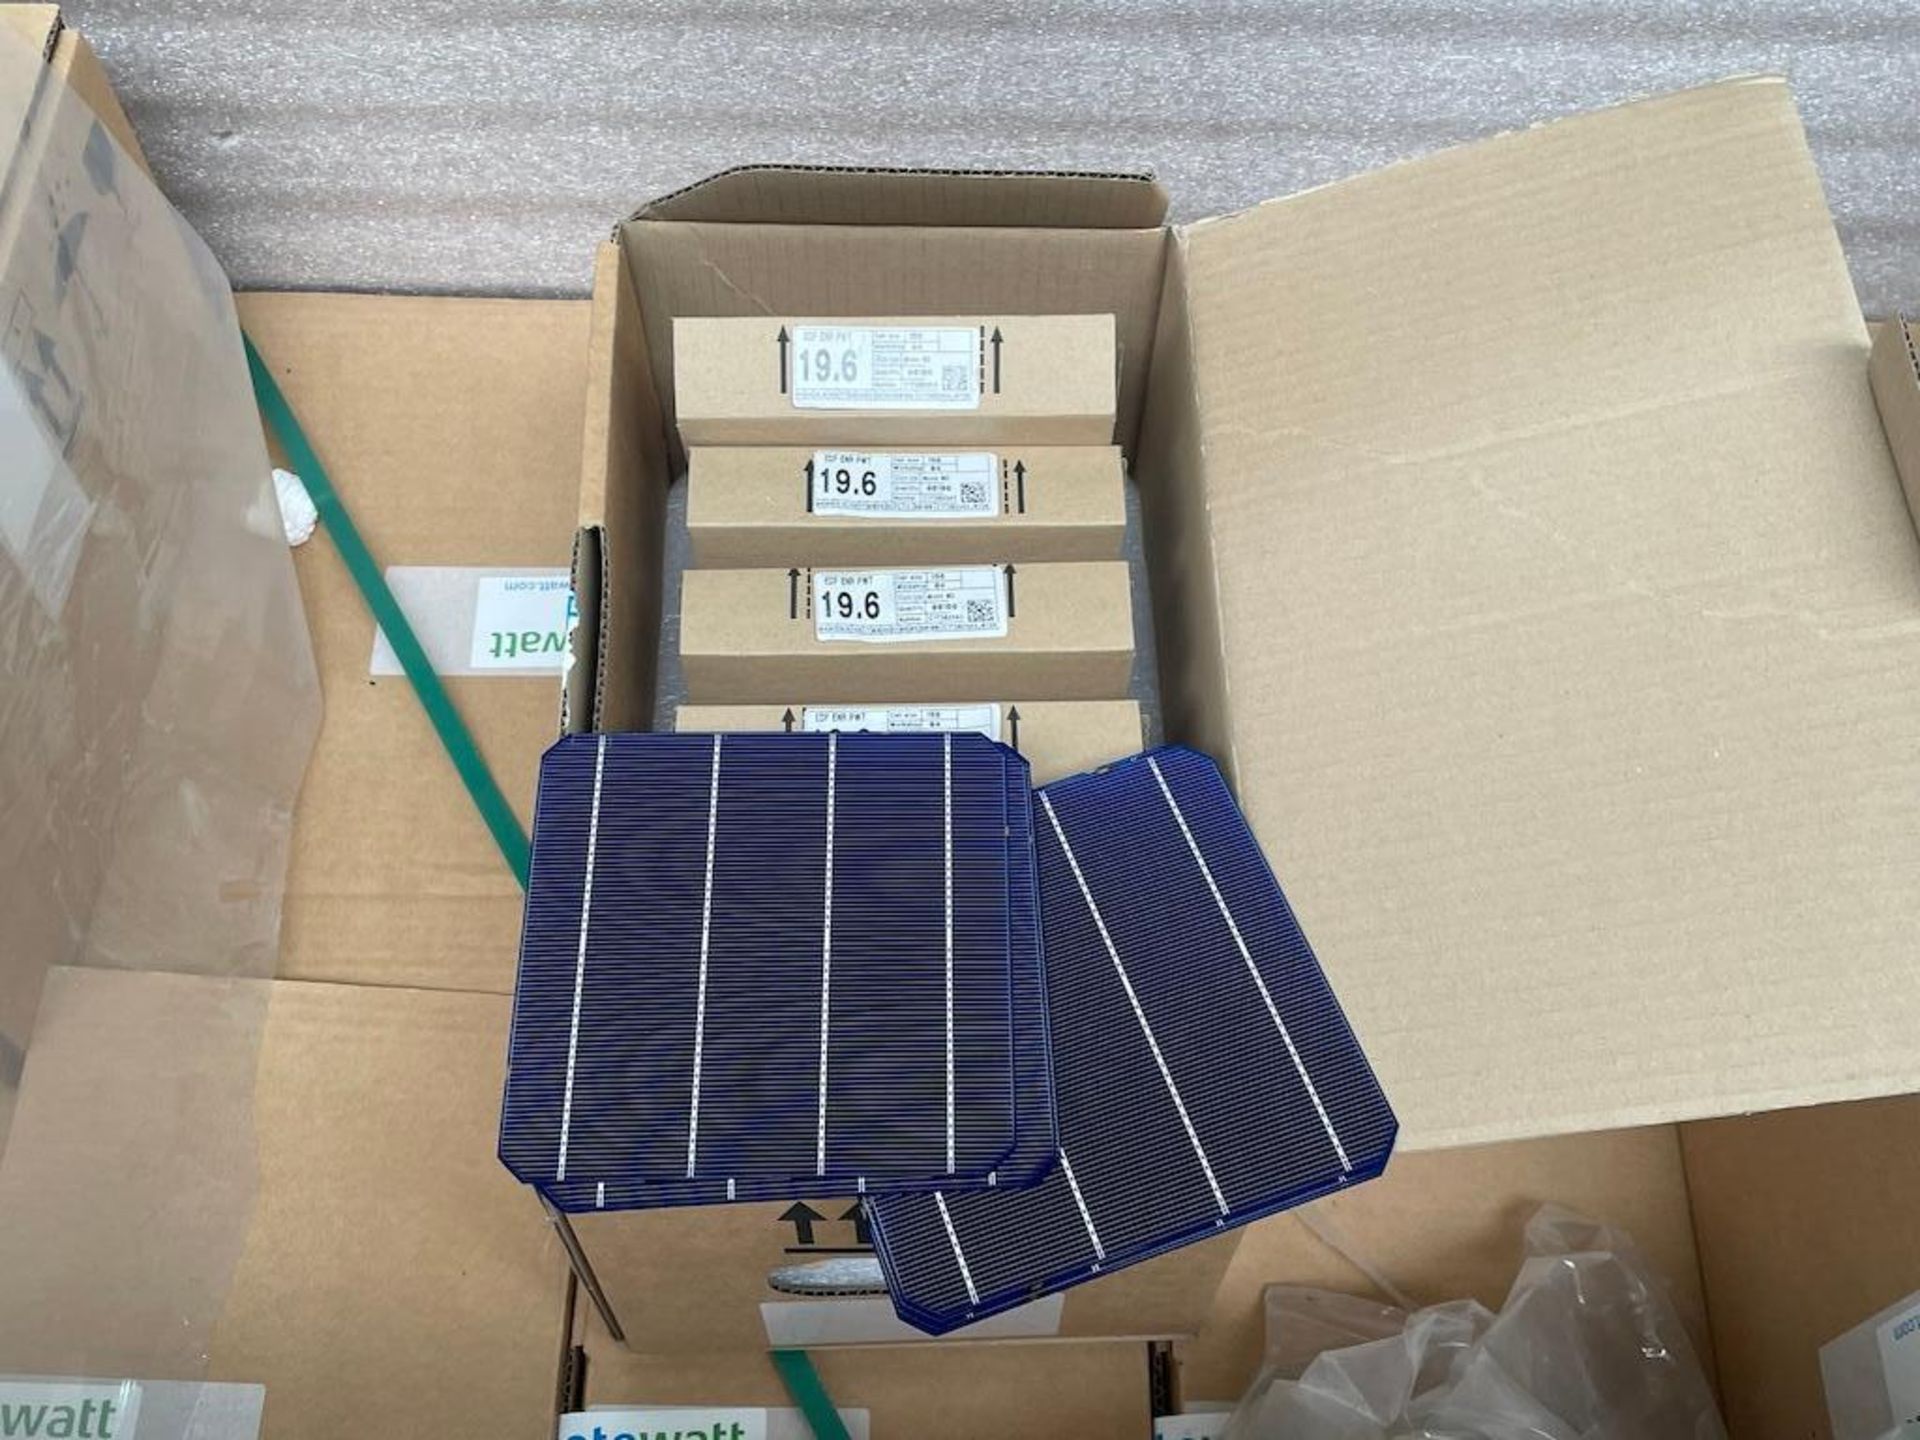 LOT (7) SKIDS OF APPROX. 100,000 PIECES OF PHOTO WATT SOLAR CELLS, CELL SIZE 156, SILICON TYPE M2, E - Image 5 of 16